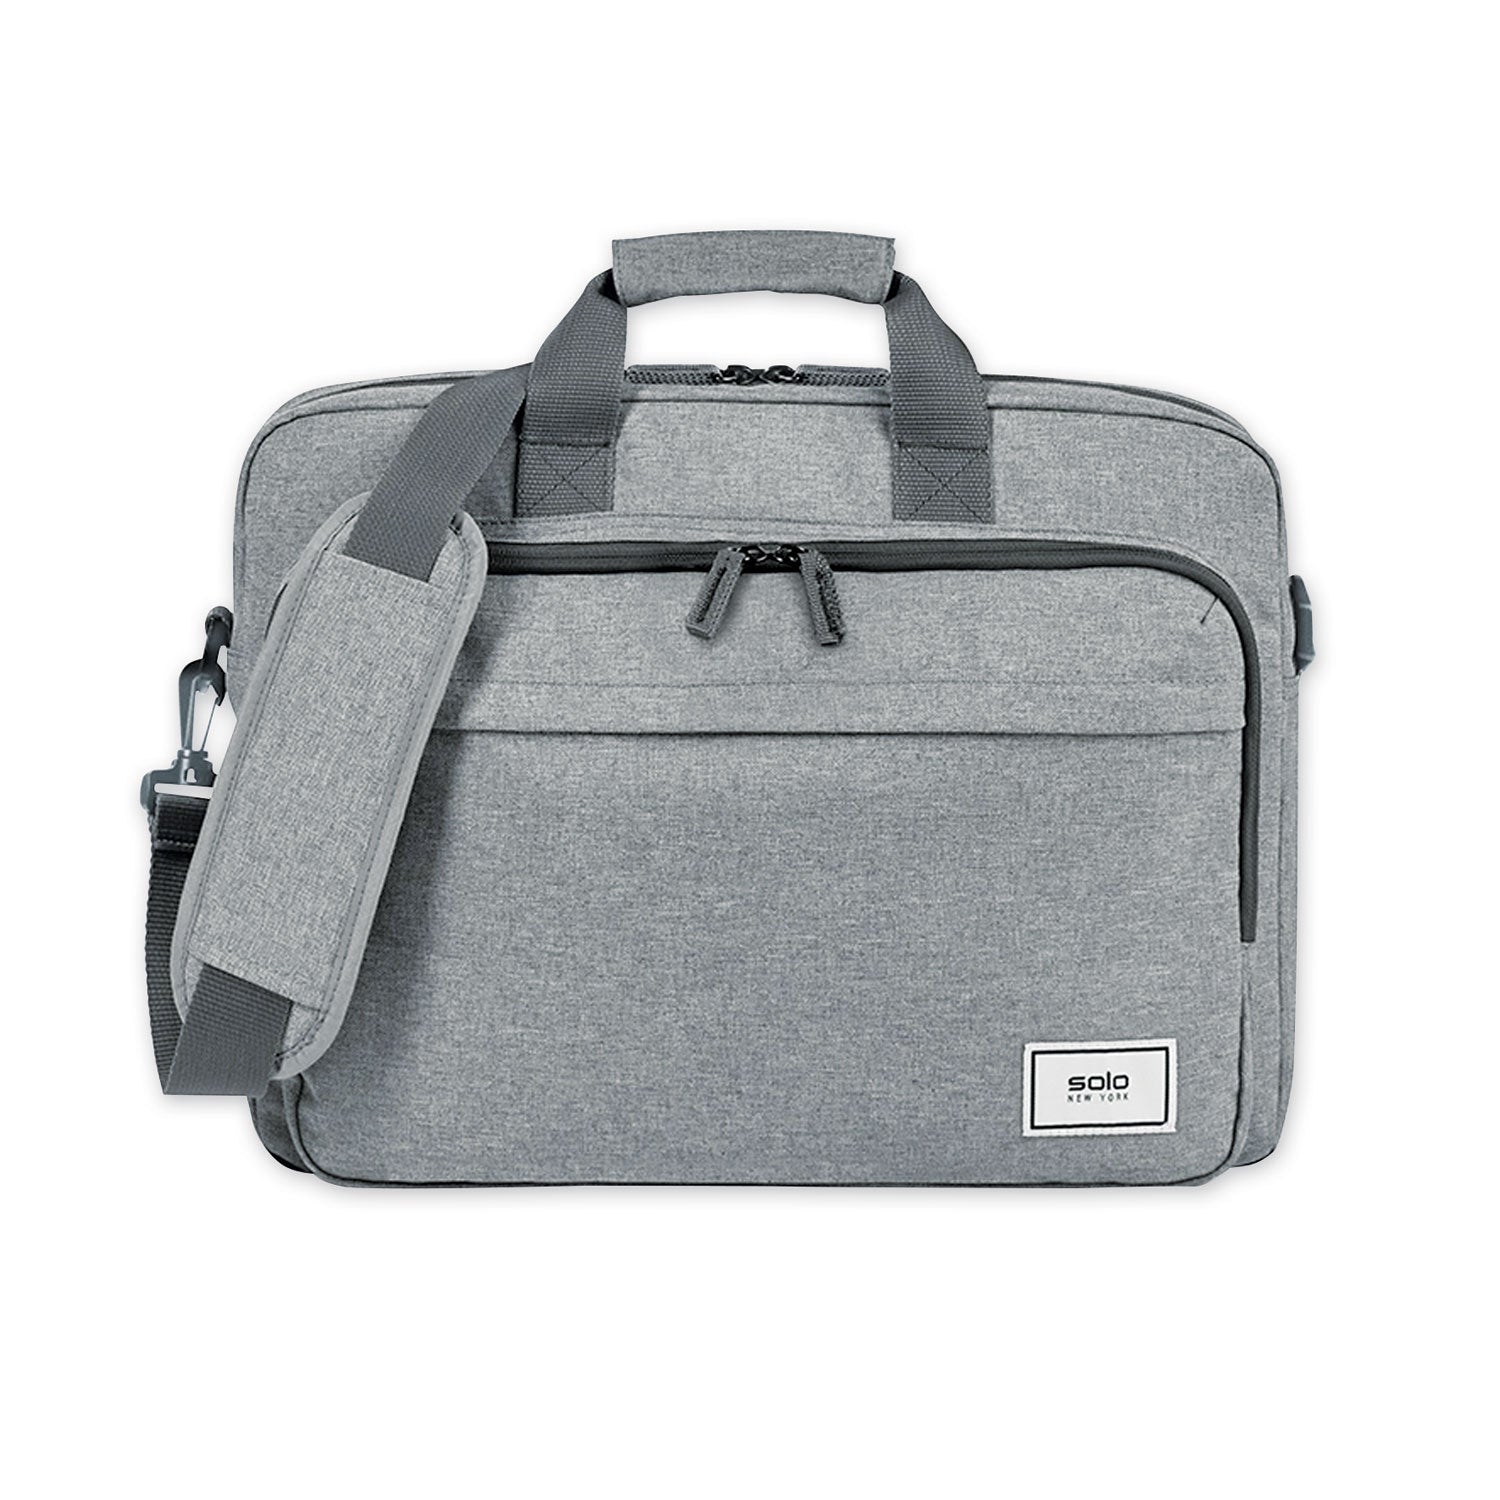 sustainable-recycled-collection-laptop-bag-fits-devices-up-to-156-recycled-pet-polyester-1625-x-45-x-12-gray_uslubn12710 - 1